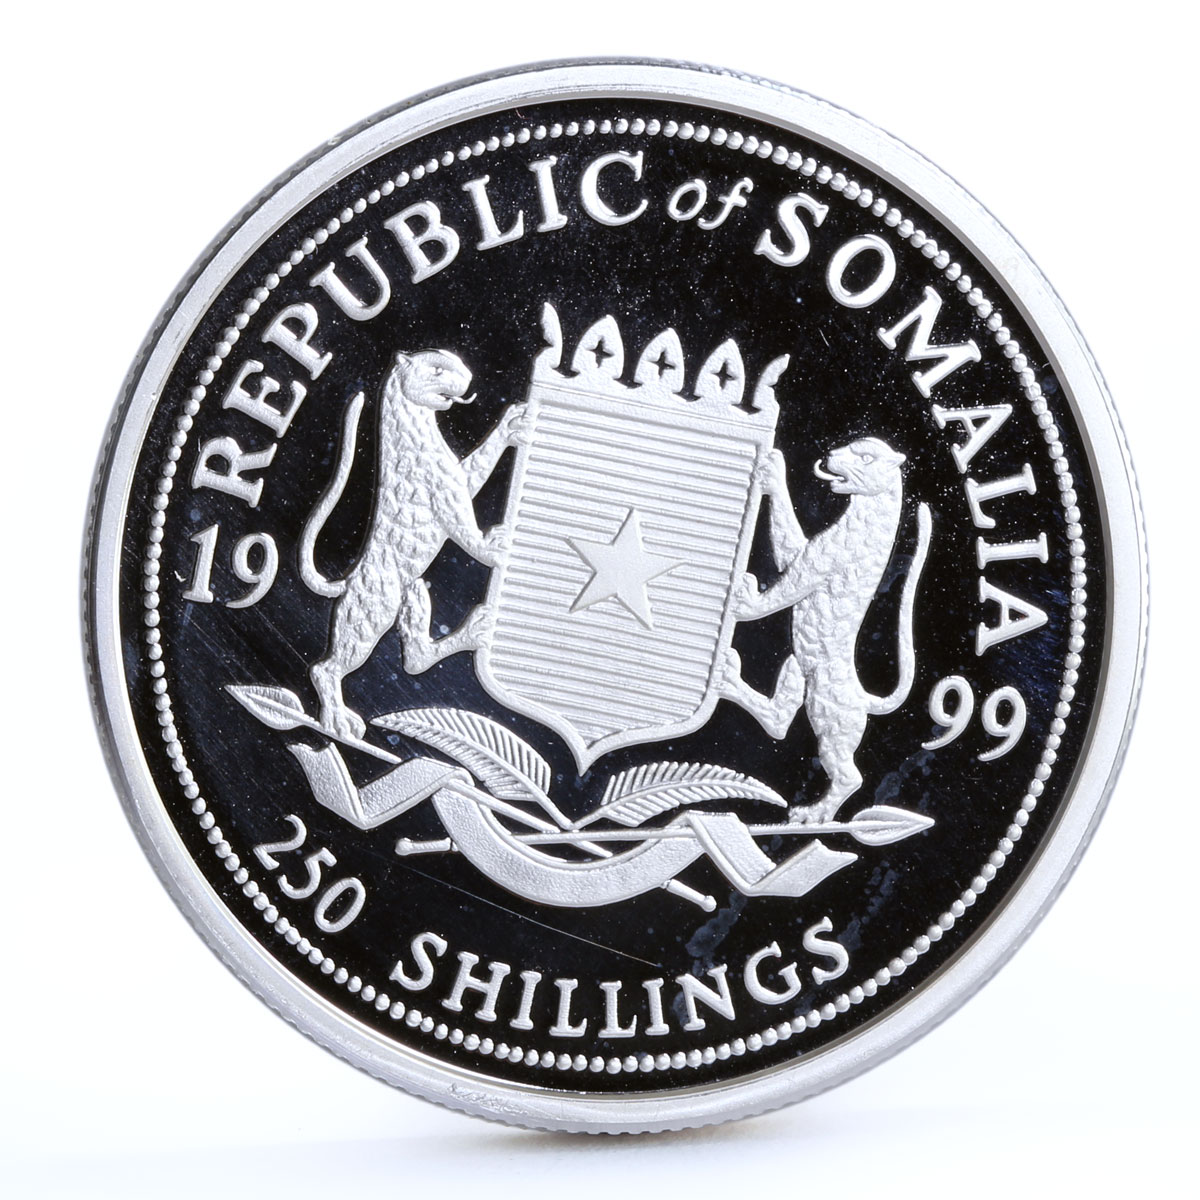 Somali 250 shillings Cruise Liner Titanic Ship Steamer proof silver coin 1999